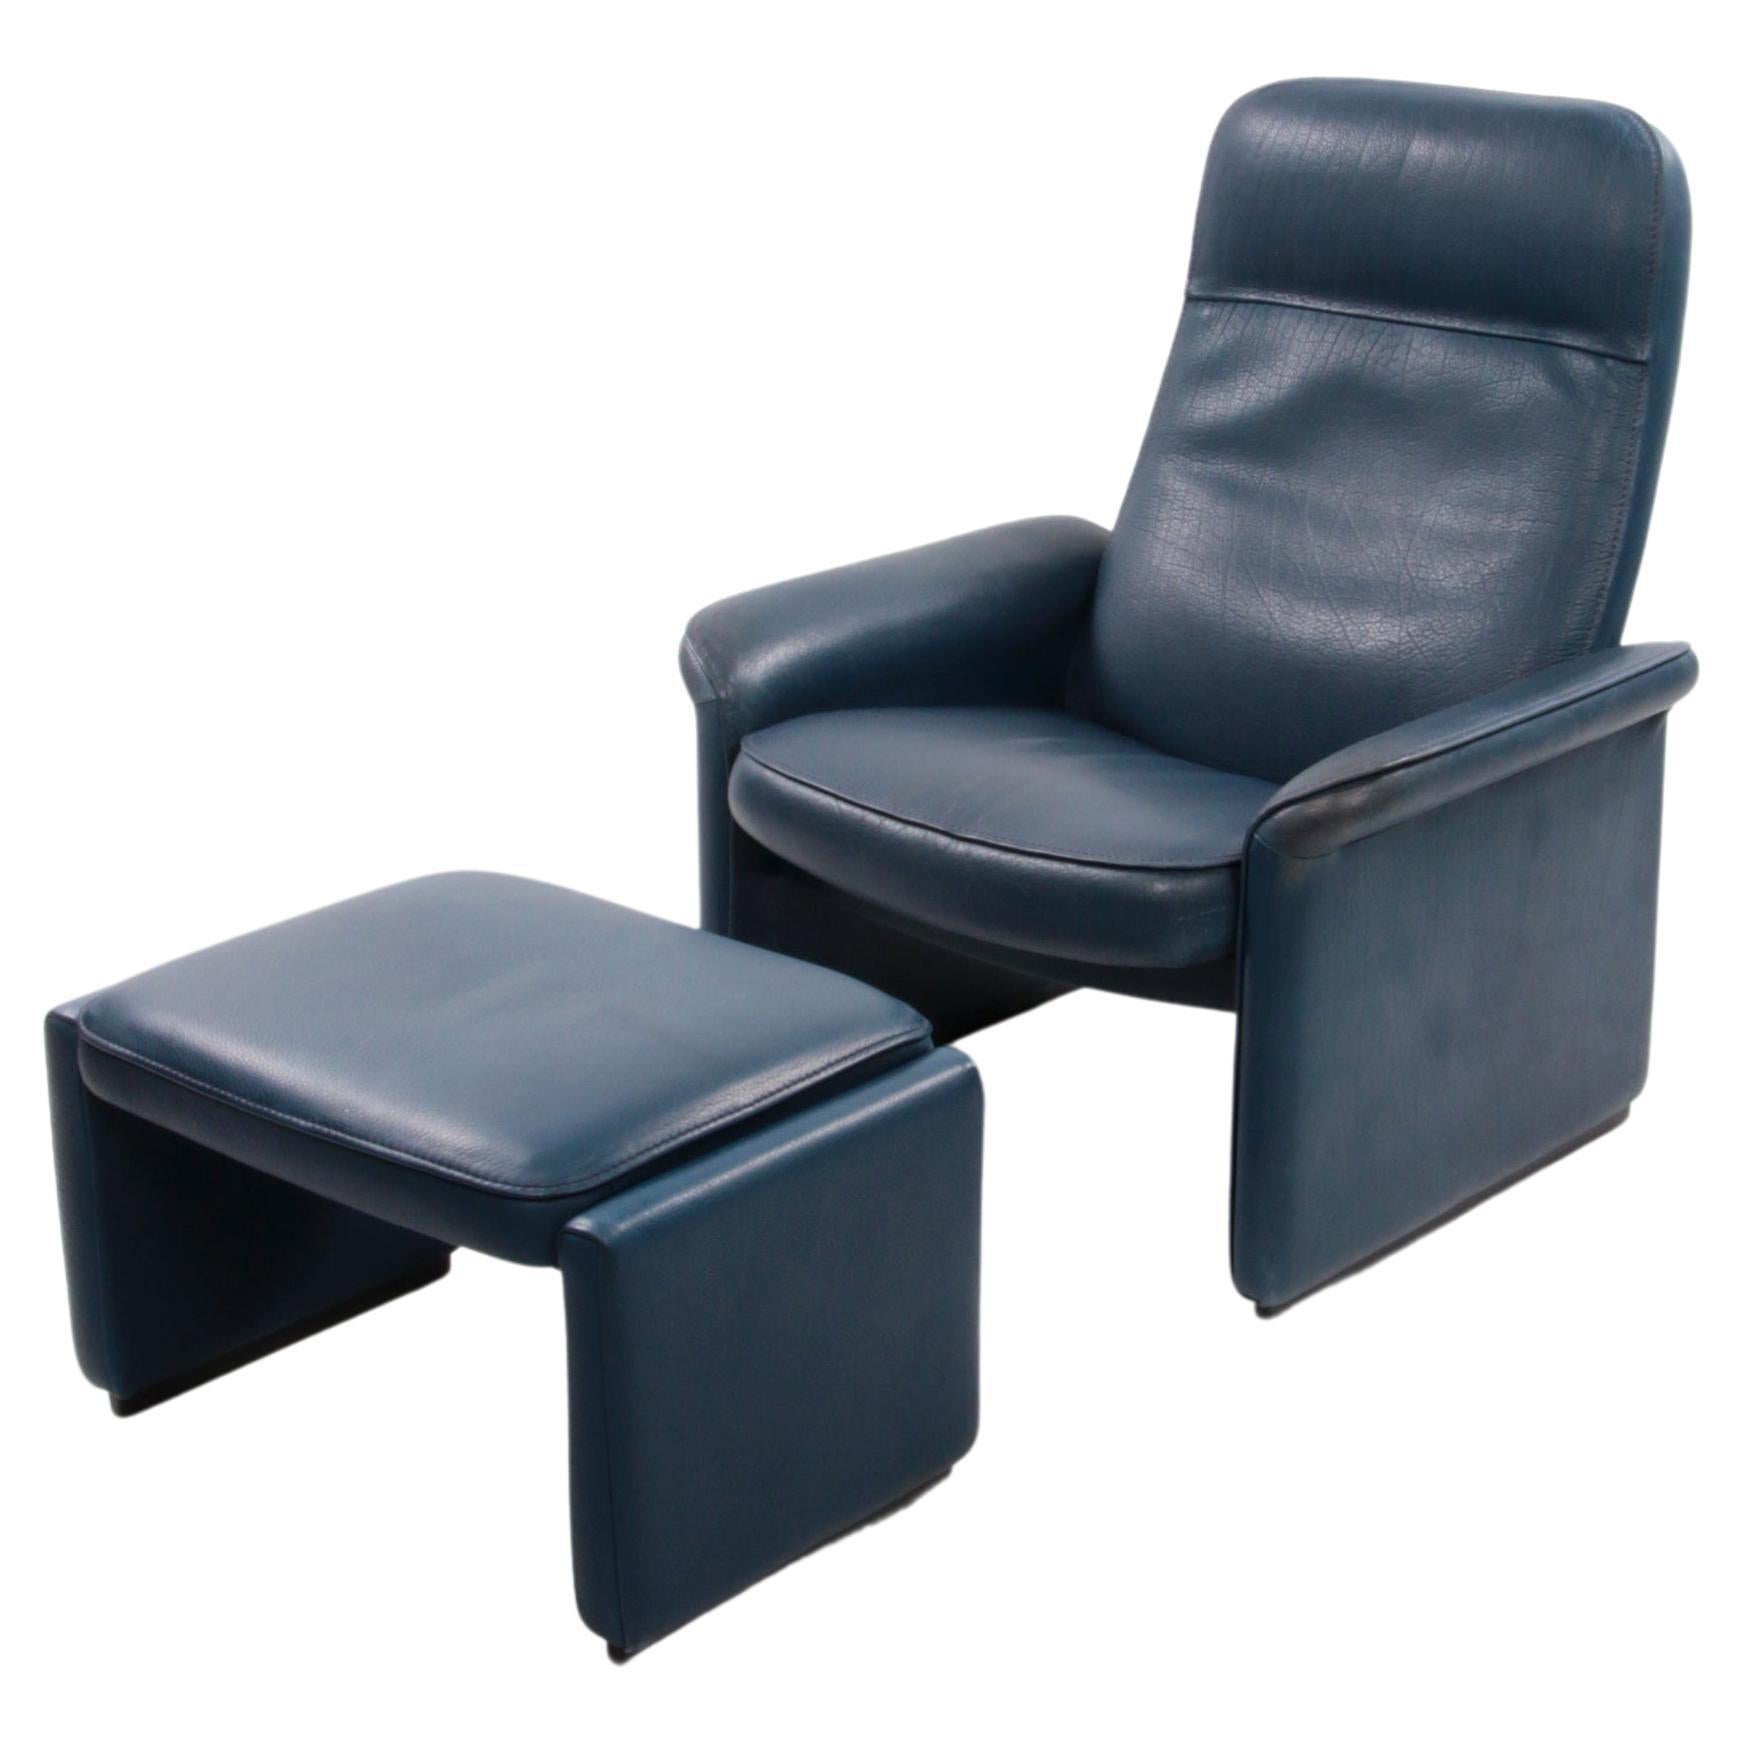 De Sede Ds 50 Relax Armchair with Hocker Leather Petrol Colour, 1980 Switzerland